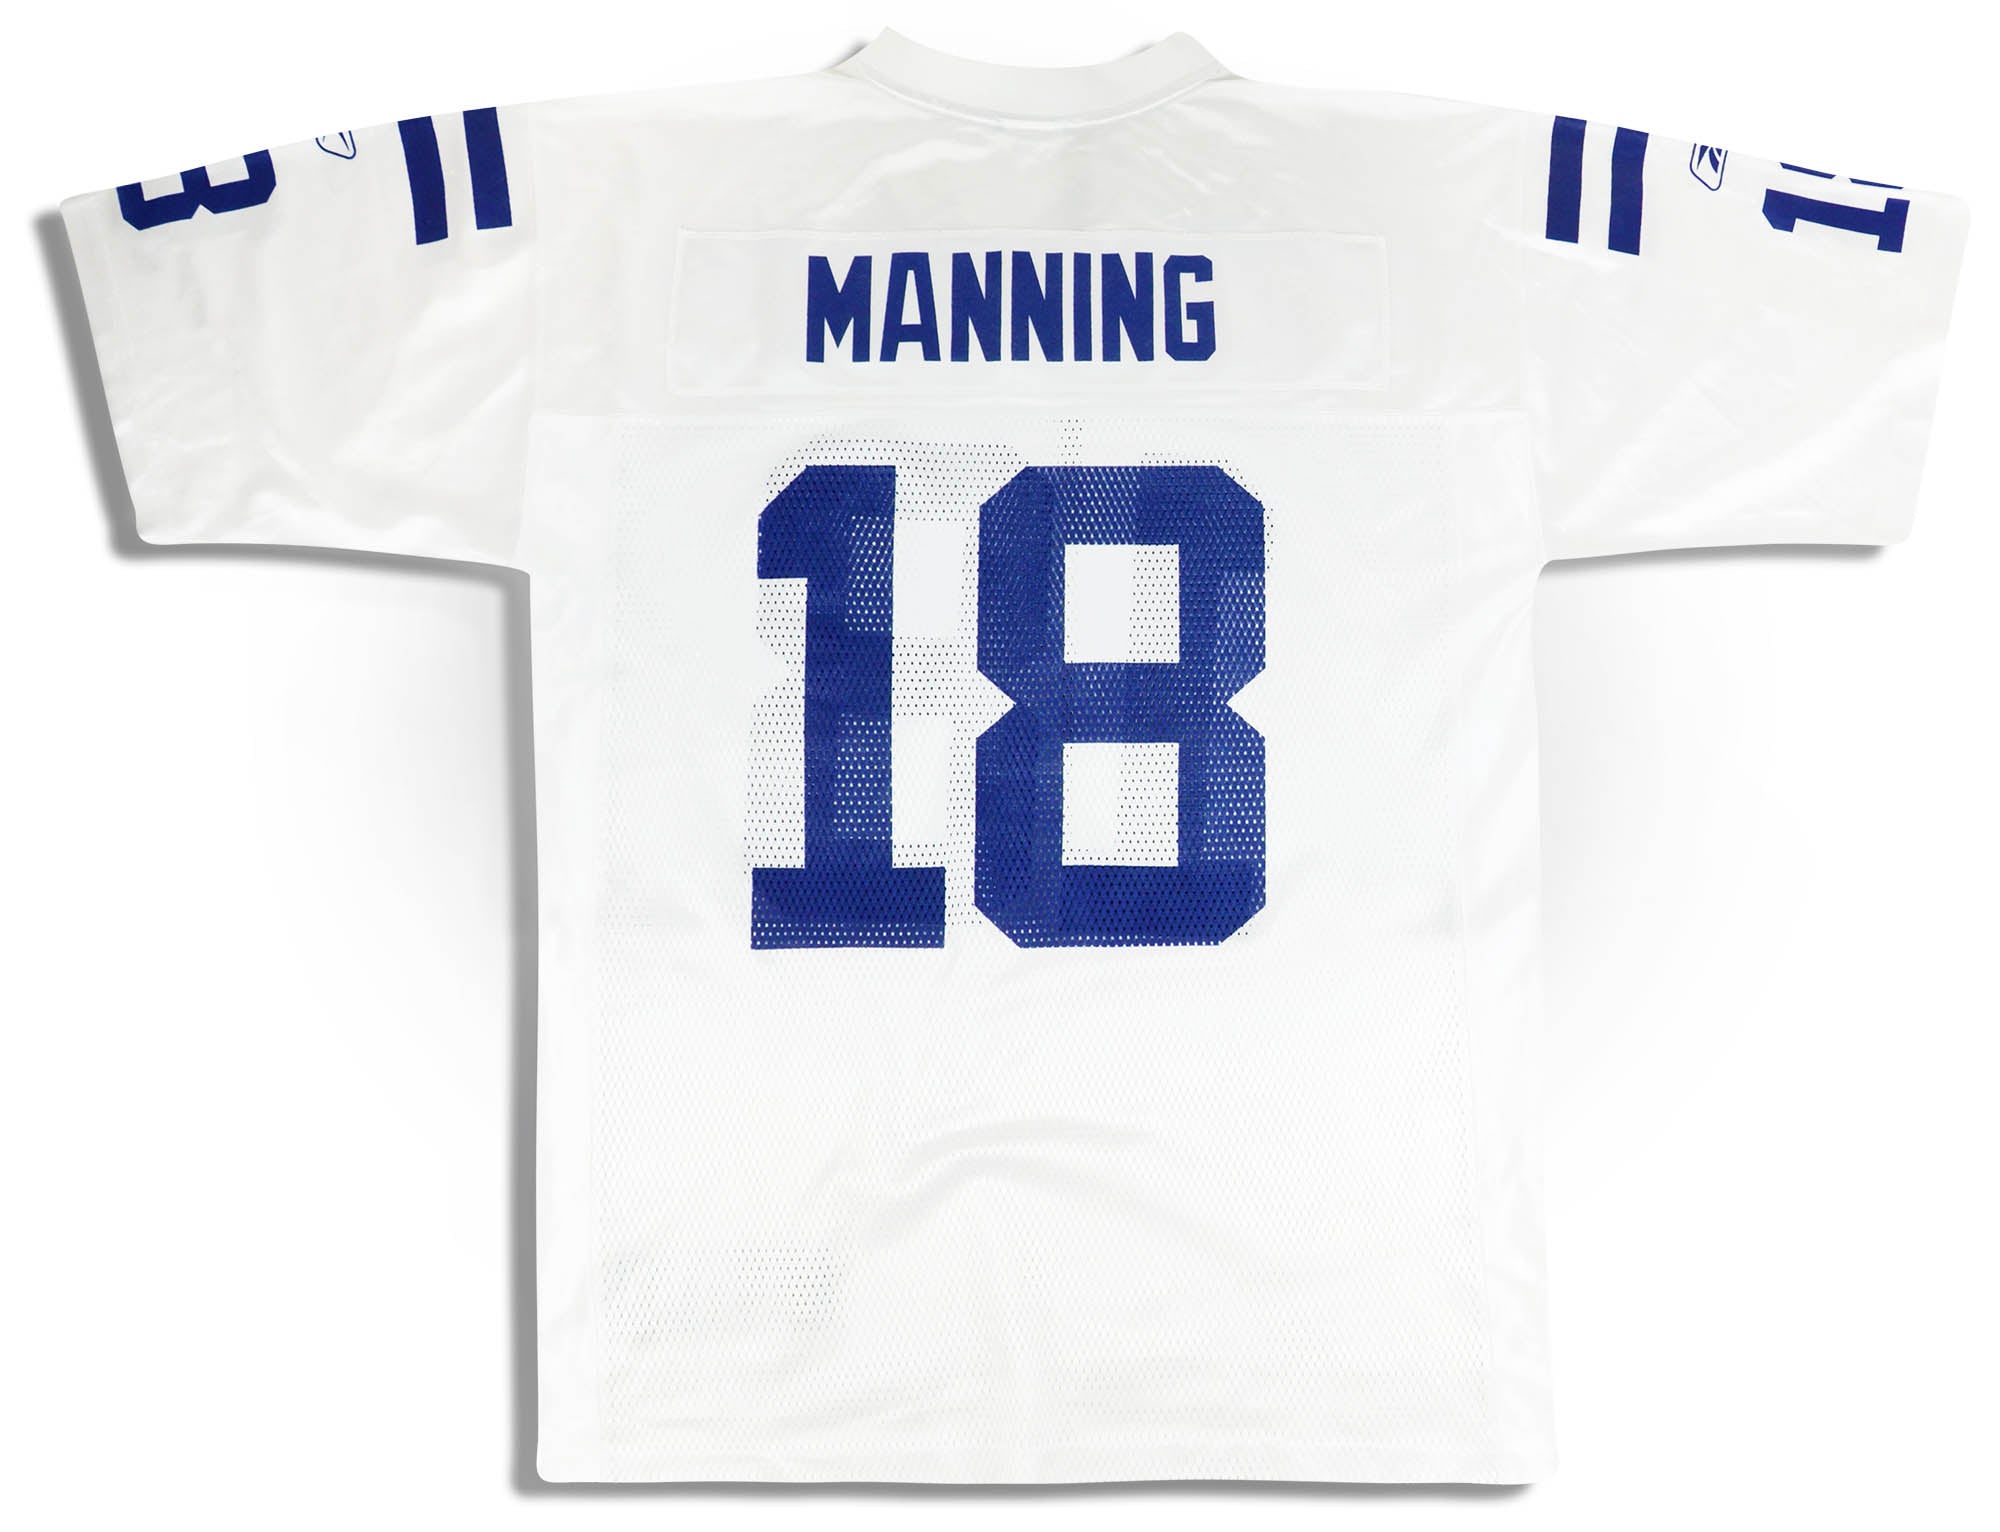 2007 INDIANAPOLIS COLTS MANNING #18 REEBOK ON FIELD JERSEY (AWAY) L